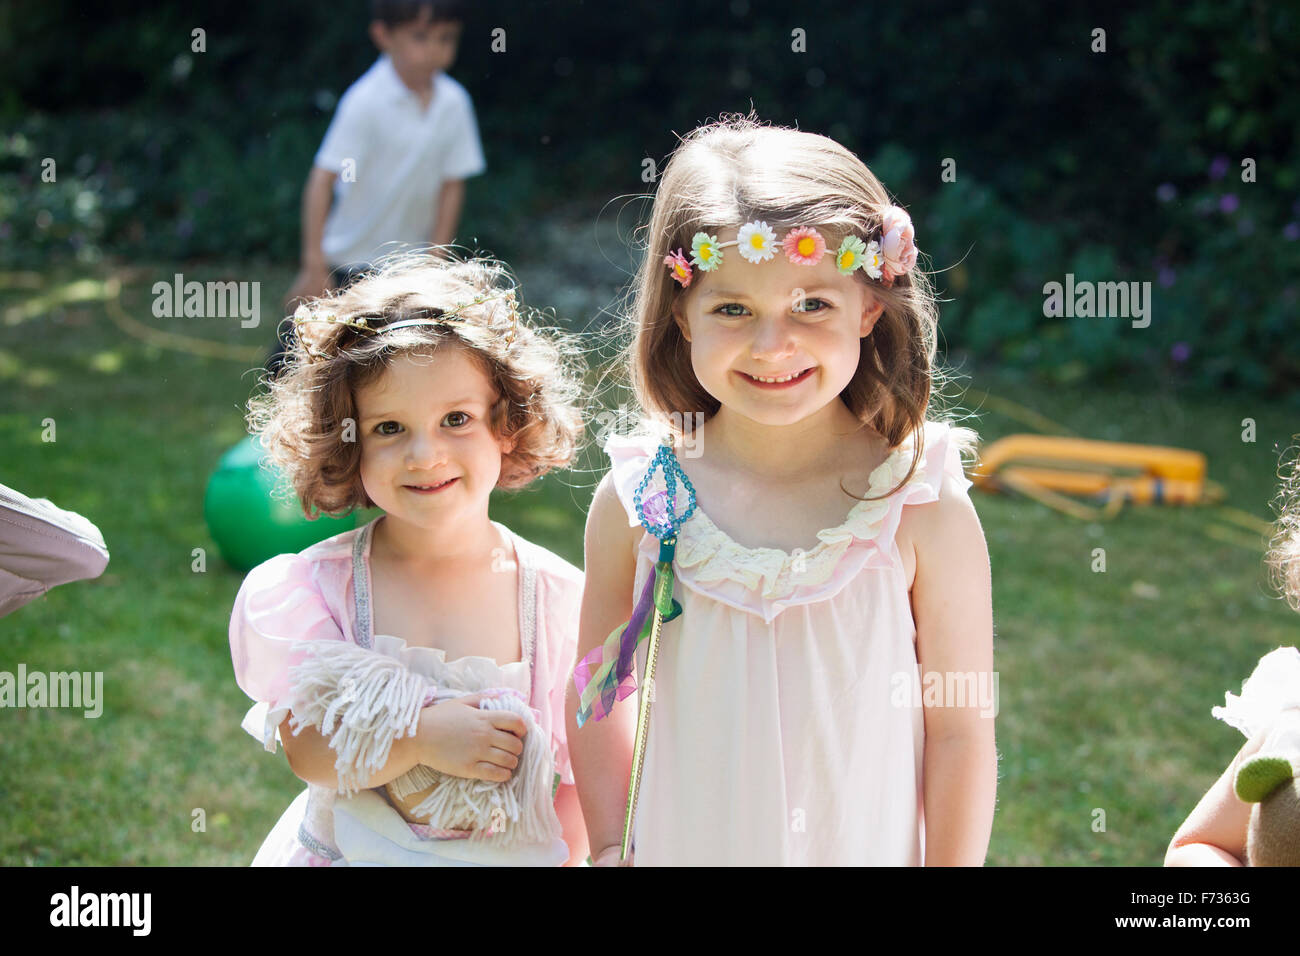 Two smiling young girls at a garden party. Stock Photo